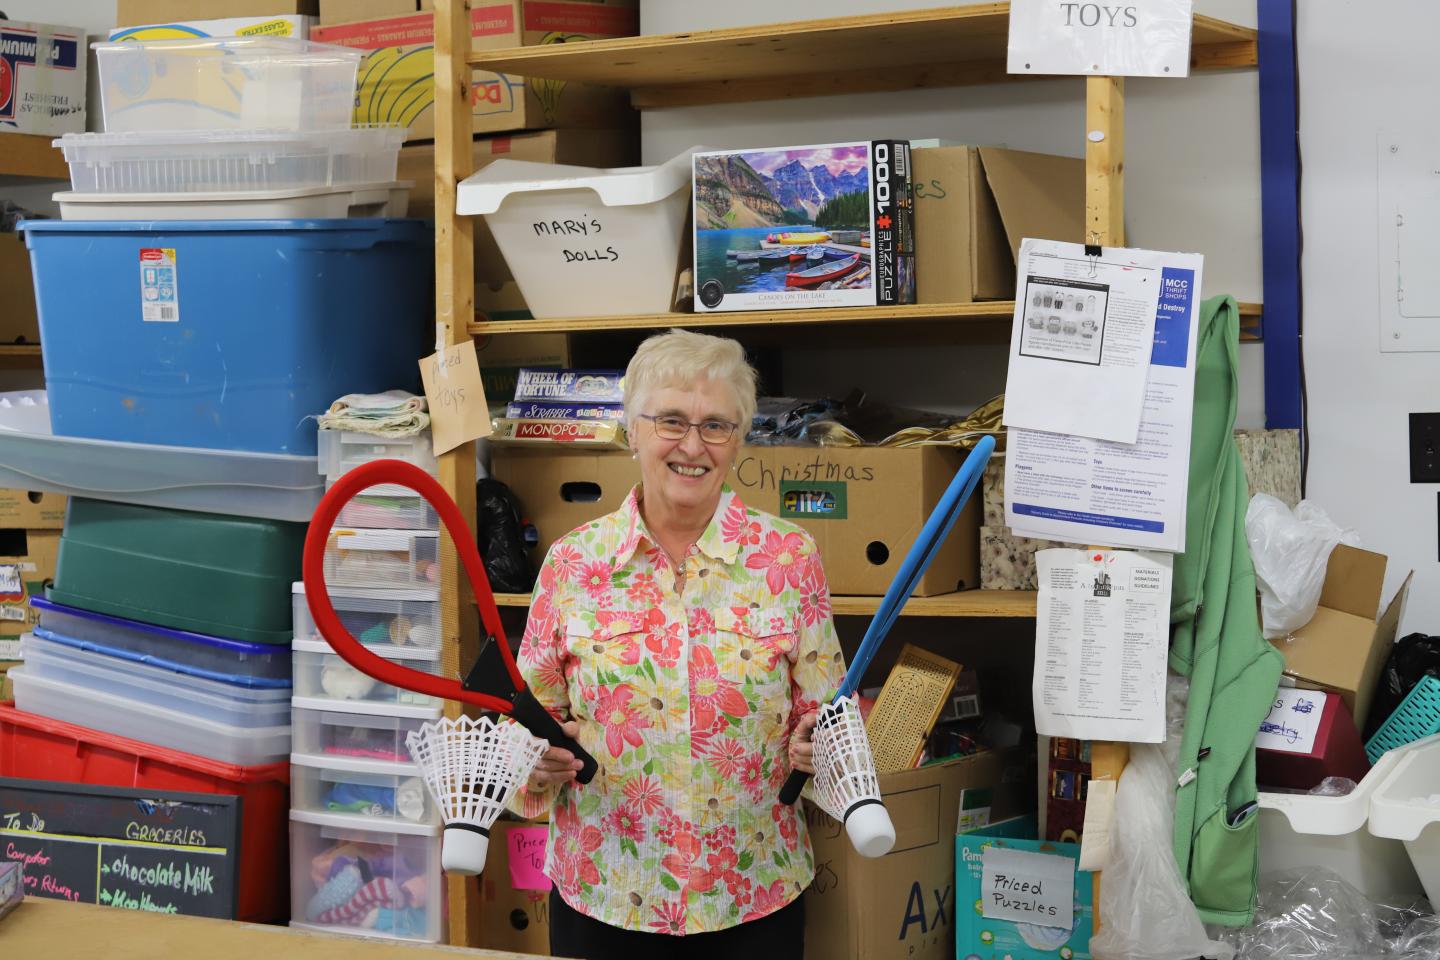 An older woman in a floral shirt stands in front of a wall of thrift shop donations. She is holding large badminton rackets and birdies 